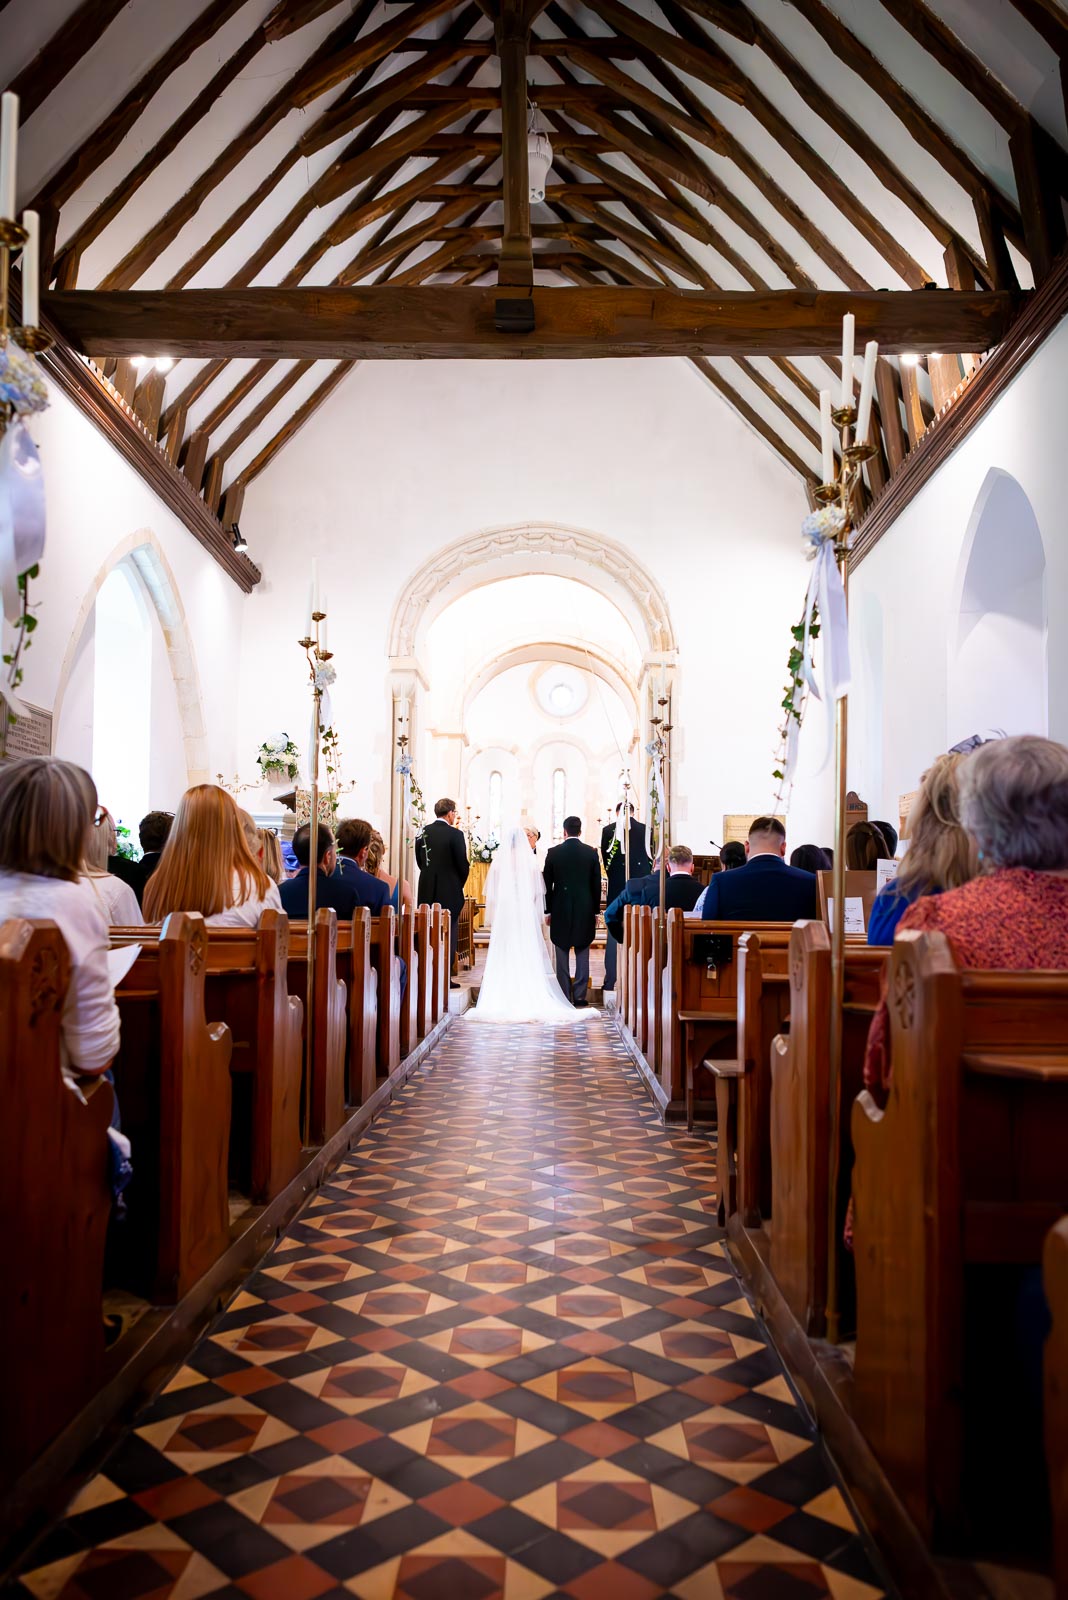 Lily and Callum arrive at the top of the aisle at St Nicholas Church in Iford before their wedding.